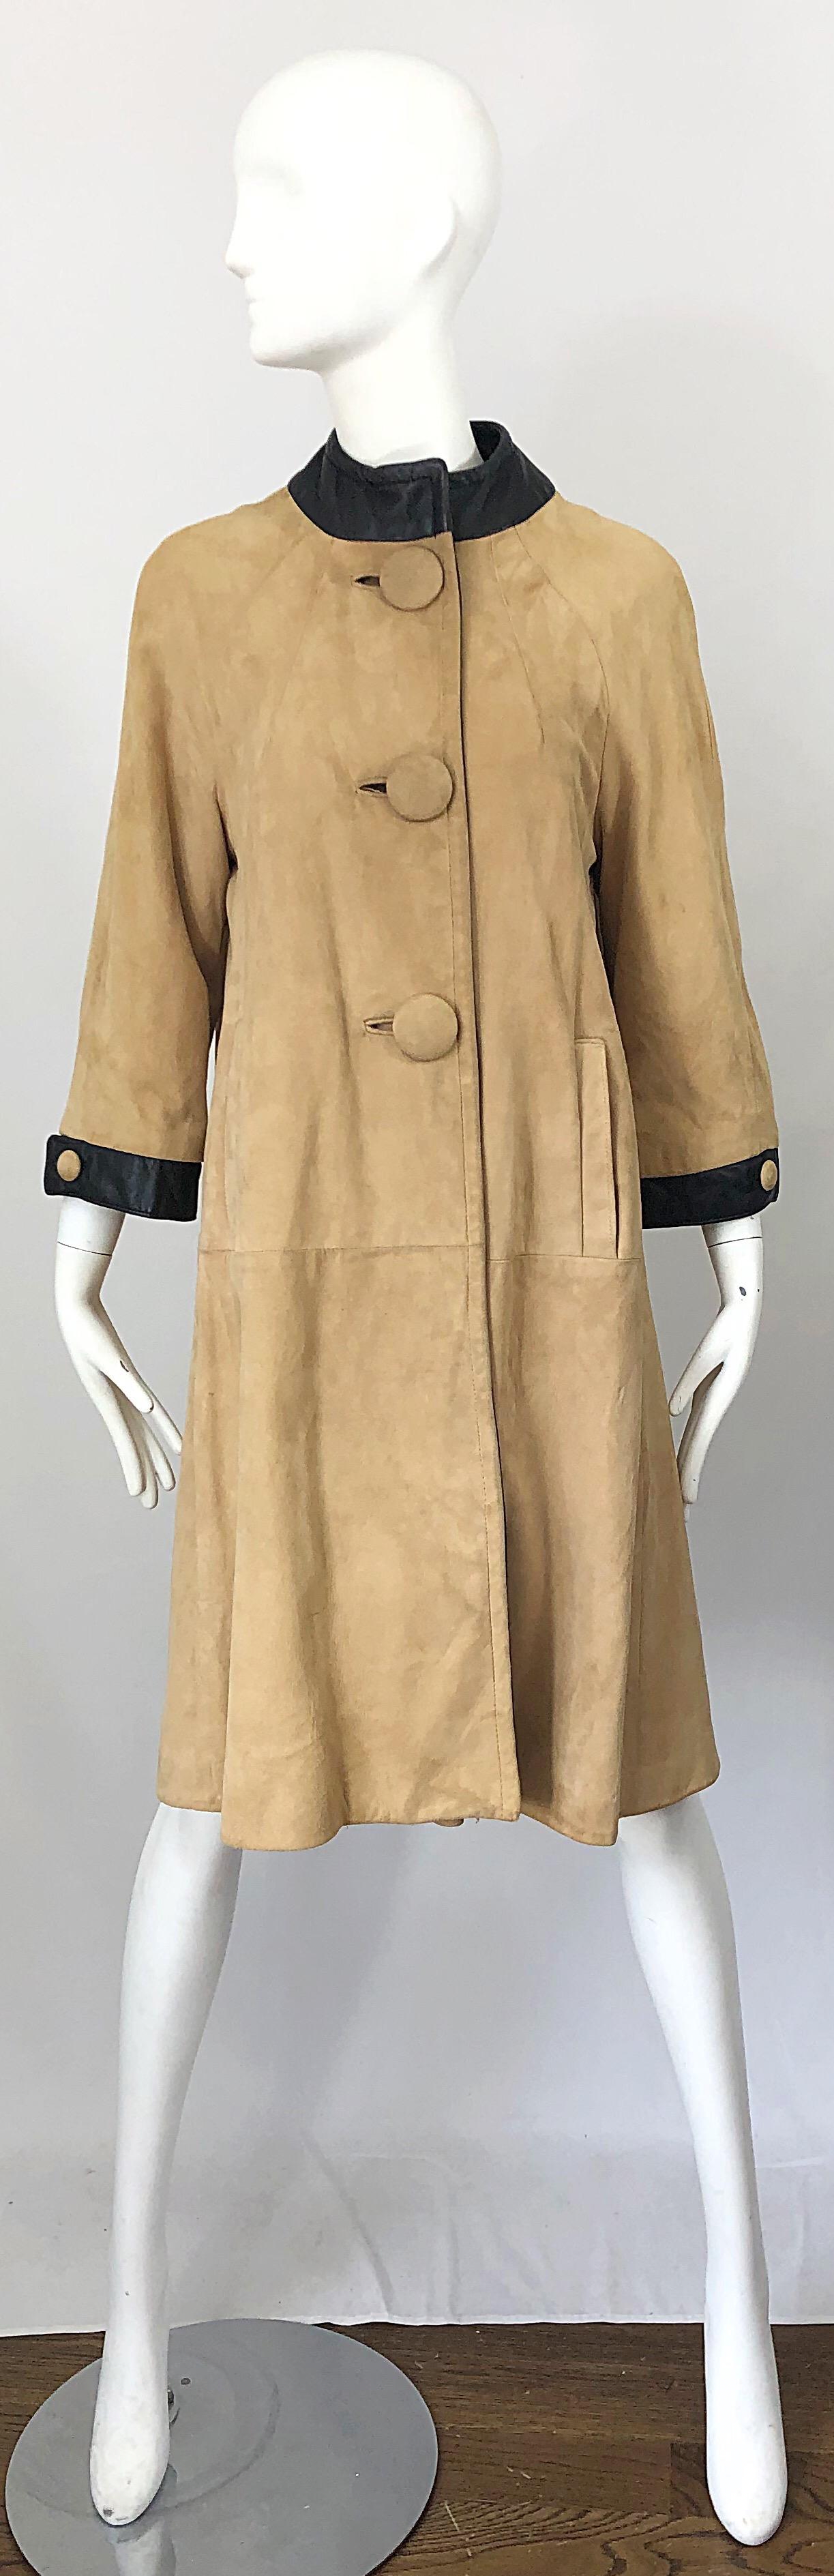 1960s Lillie Rubin Tan + Black Suede and Leather Vintage 60s Swing Jacket Coat 7